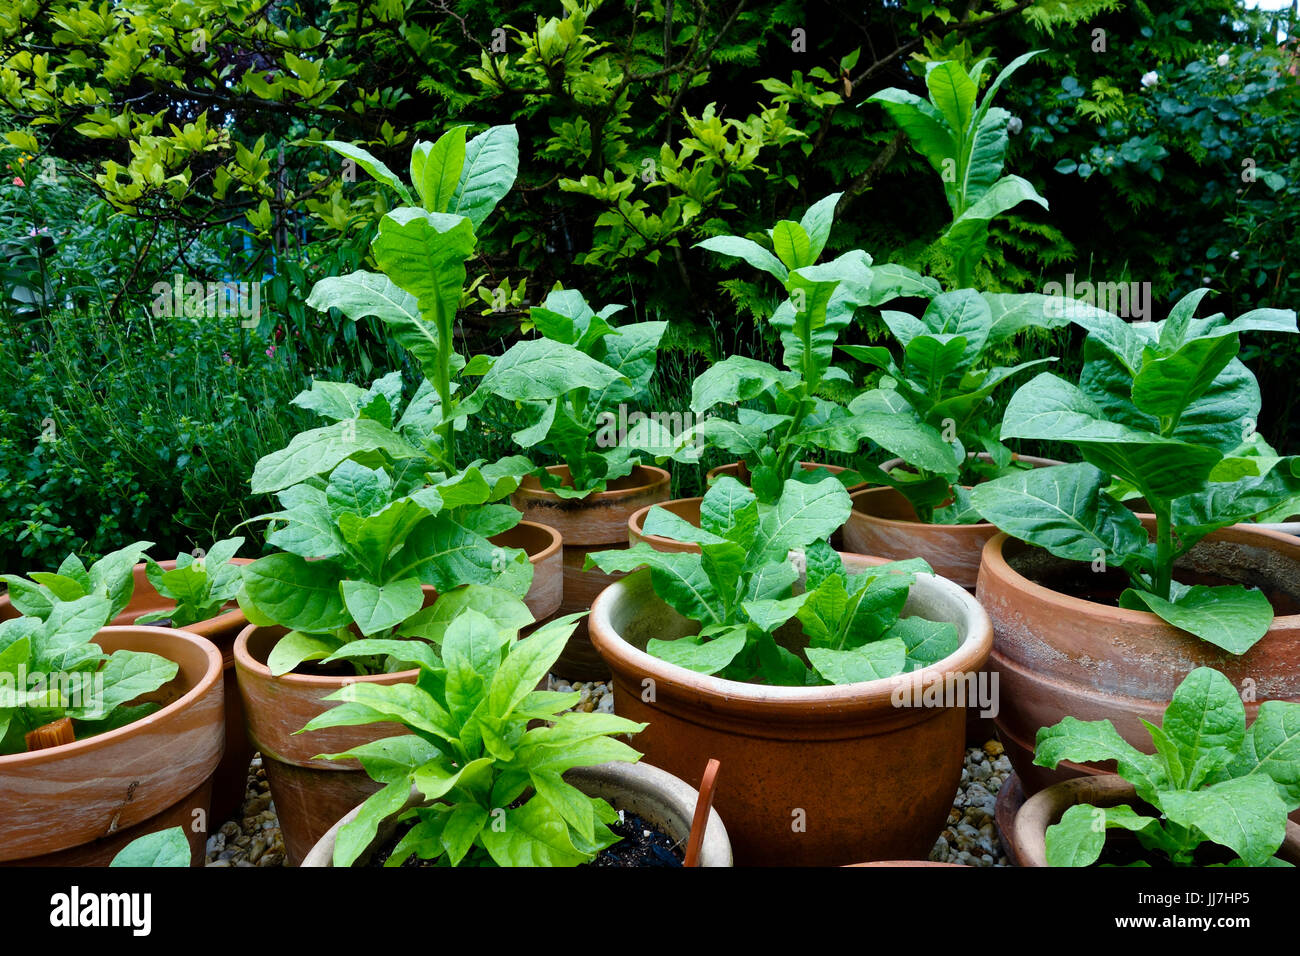 Container garden with many tobacco plants in terra-cotta pots Stock Photo